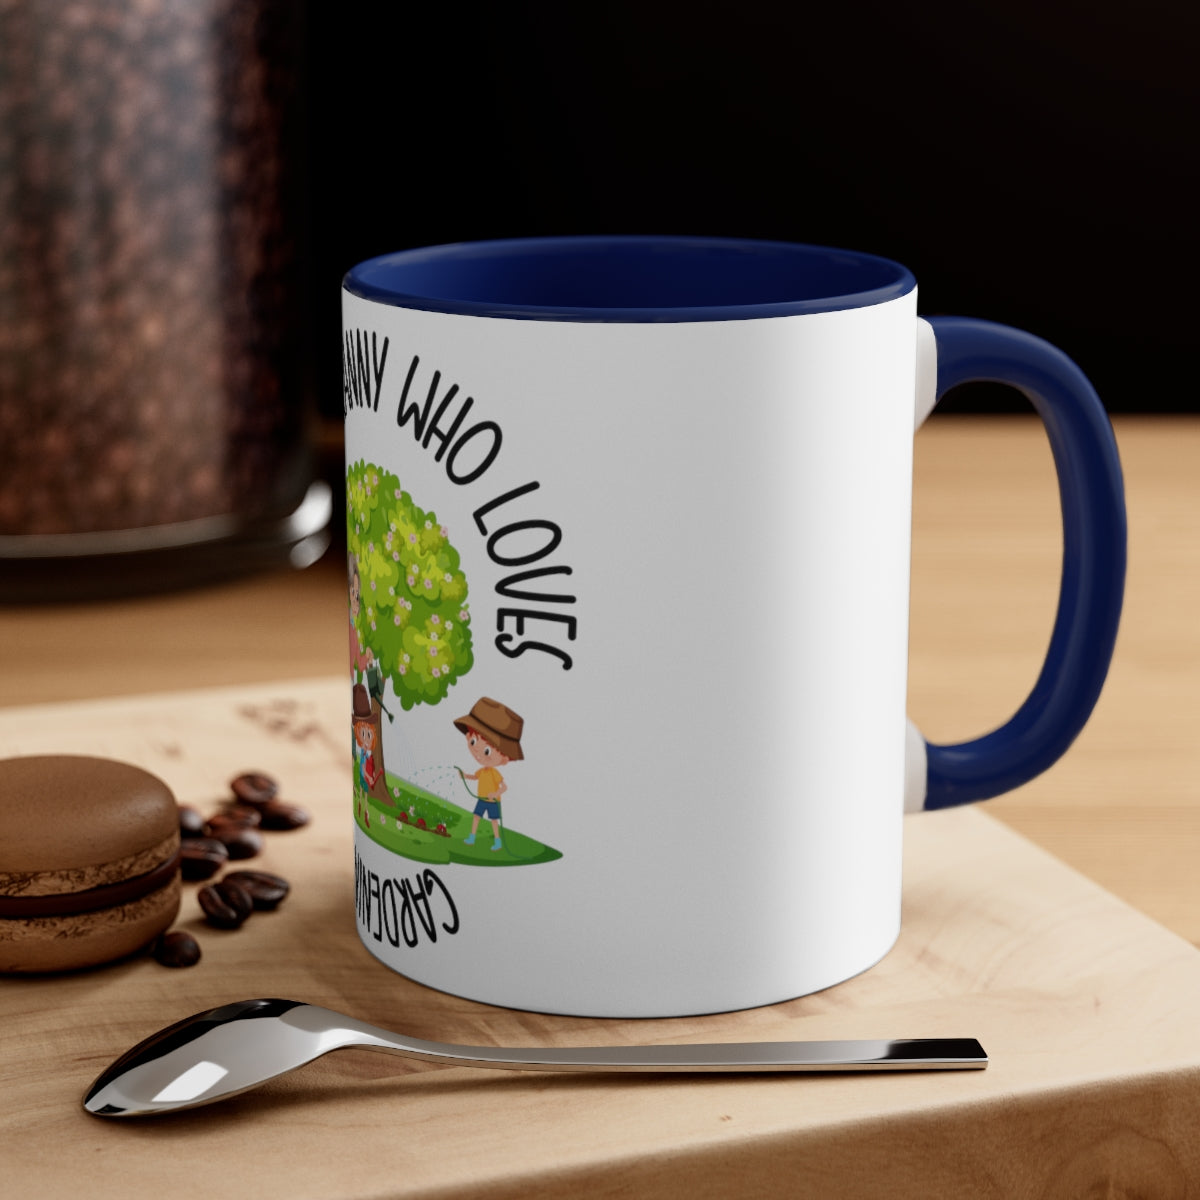 Granny Gift Just A Granny Who Loves Gardening Gift For Granny Coffee Mug or Tea Cup 11 ounce Gardener Gift